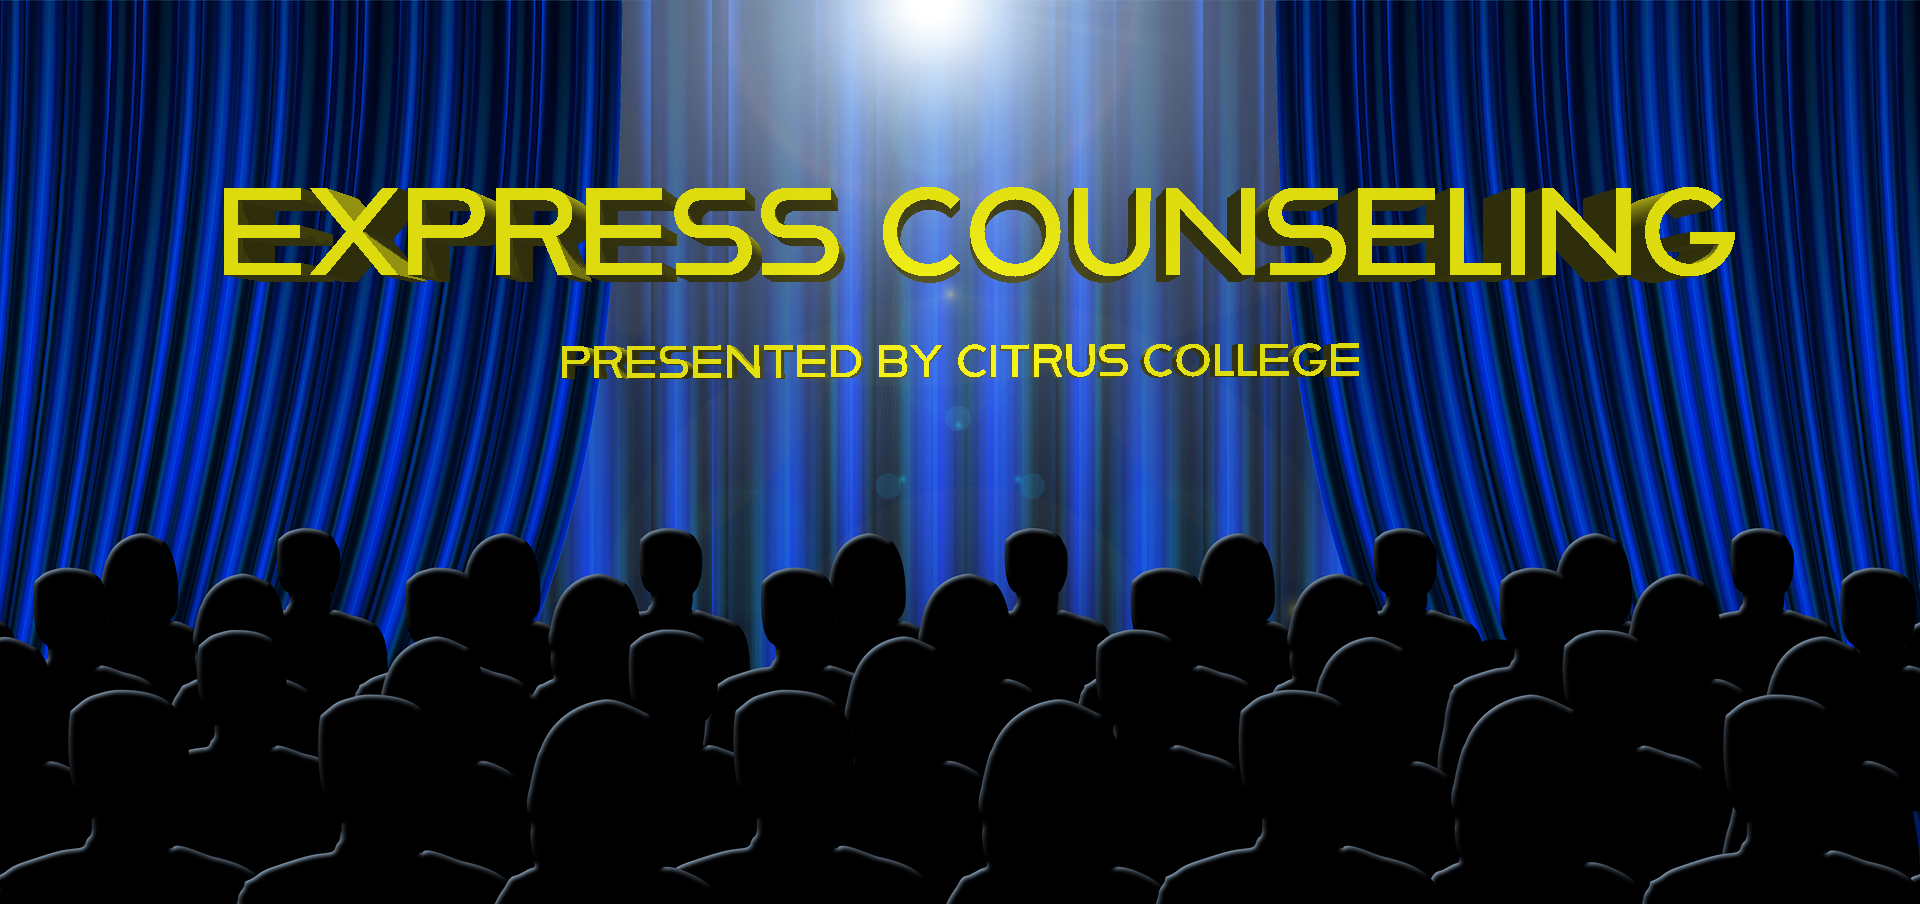 Citrus counselors create Express Counseling, virtual workshops for students during COVID-19